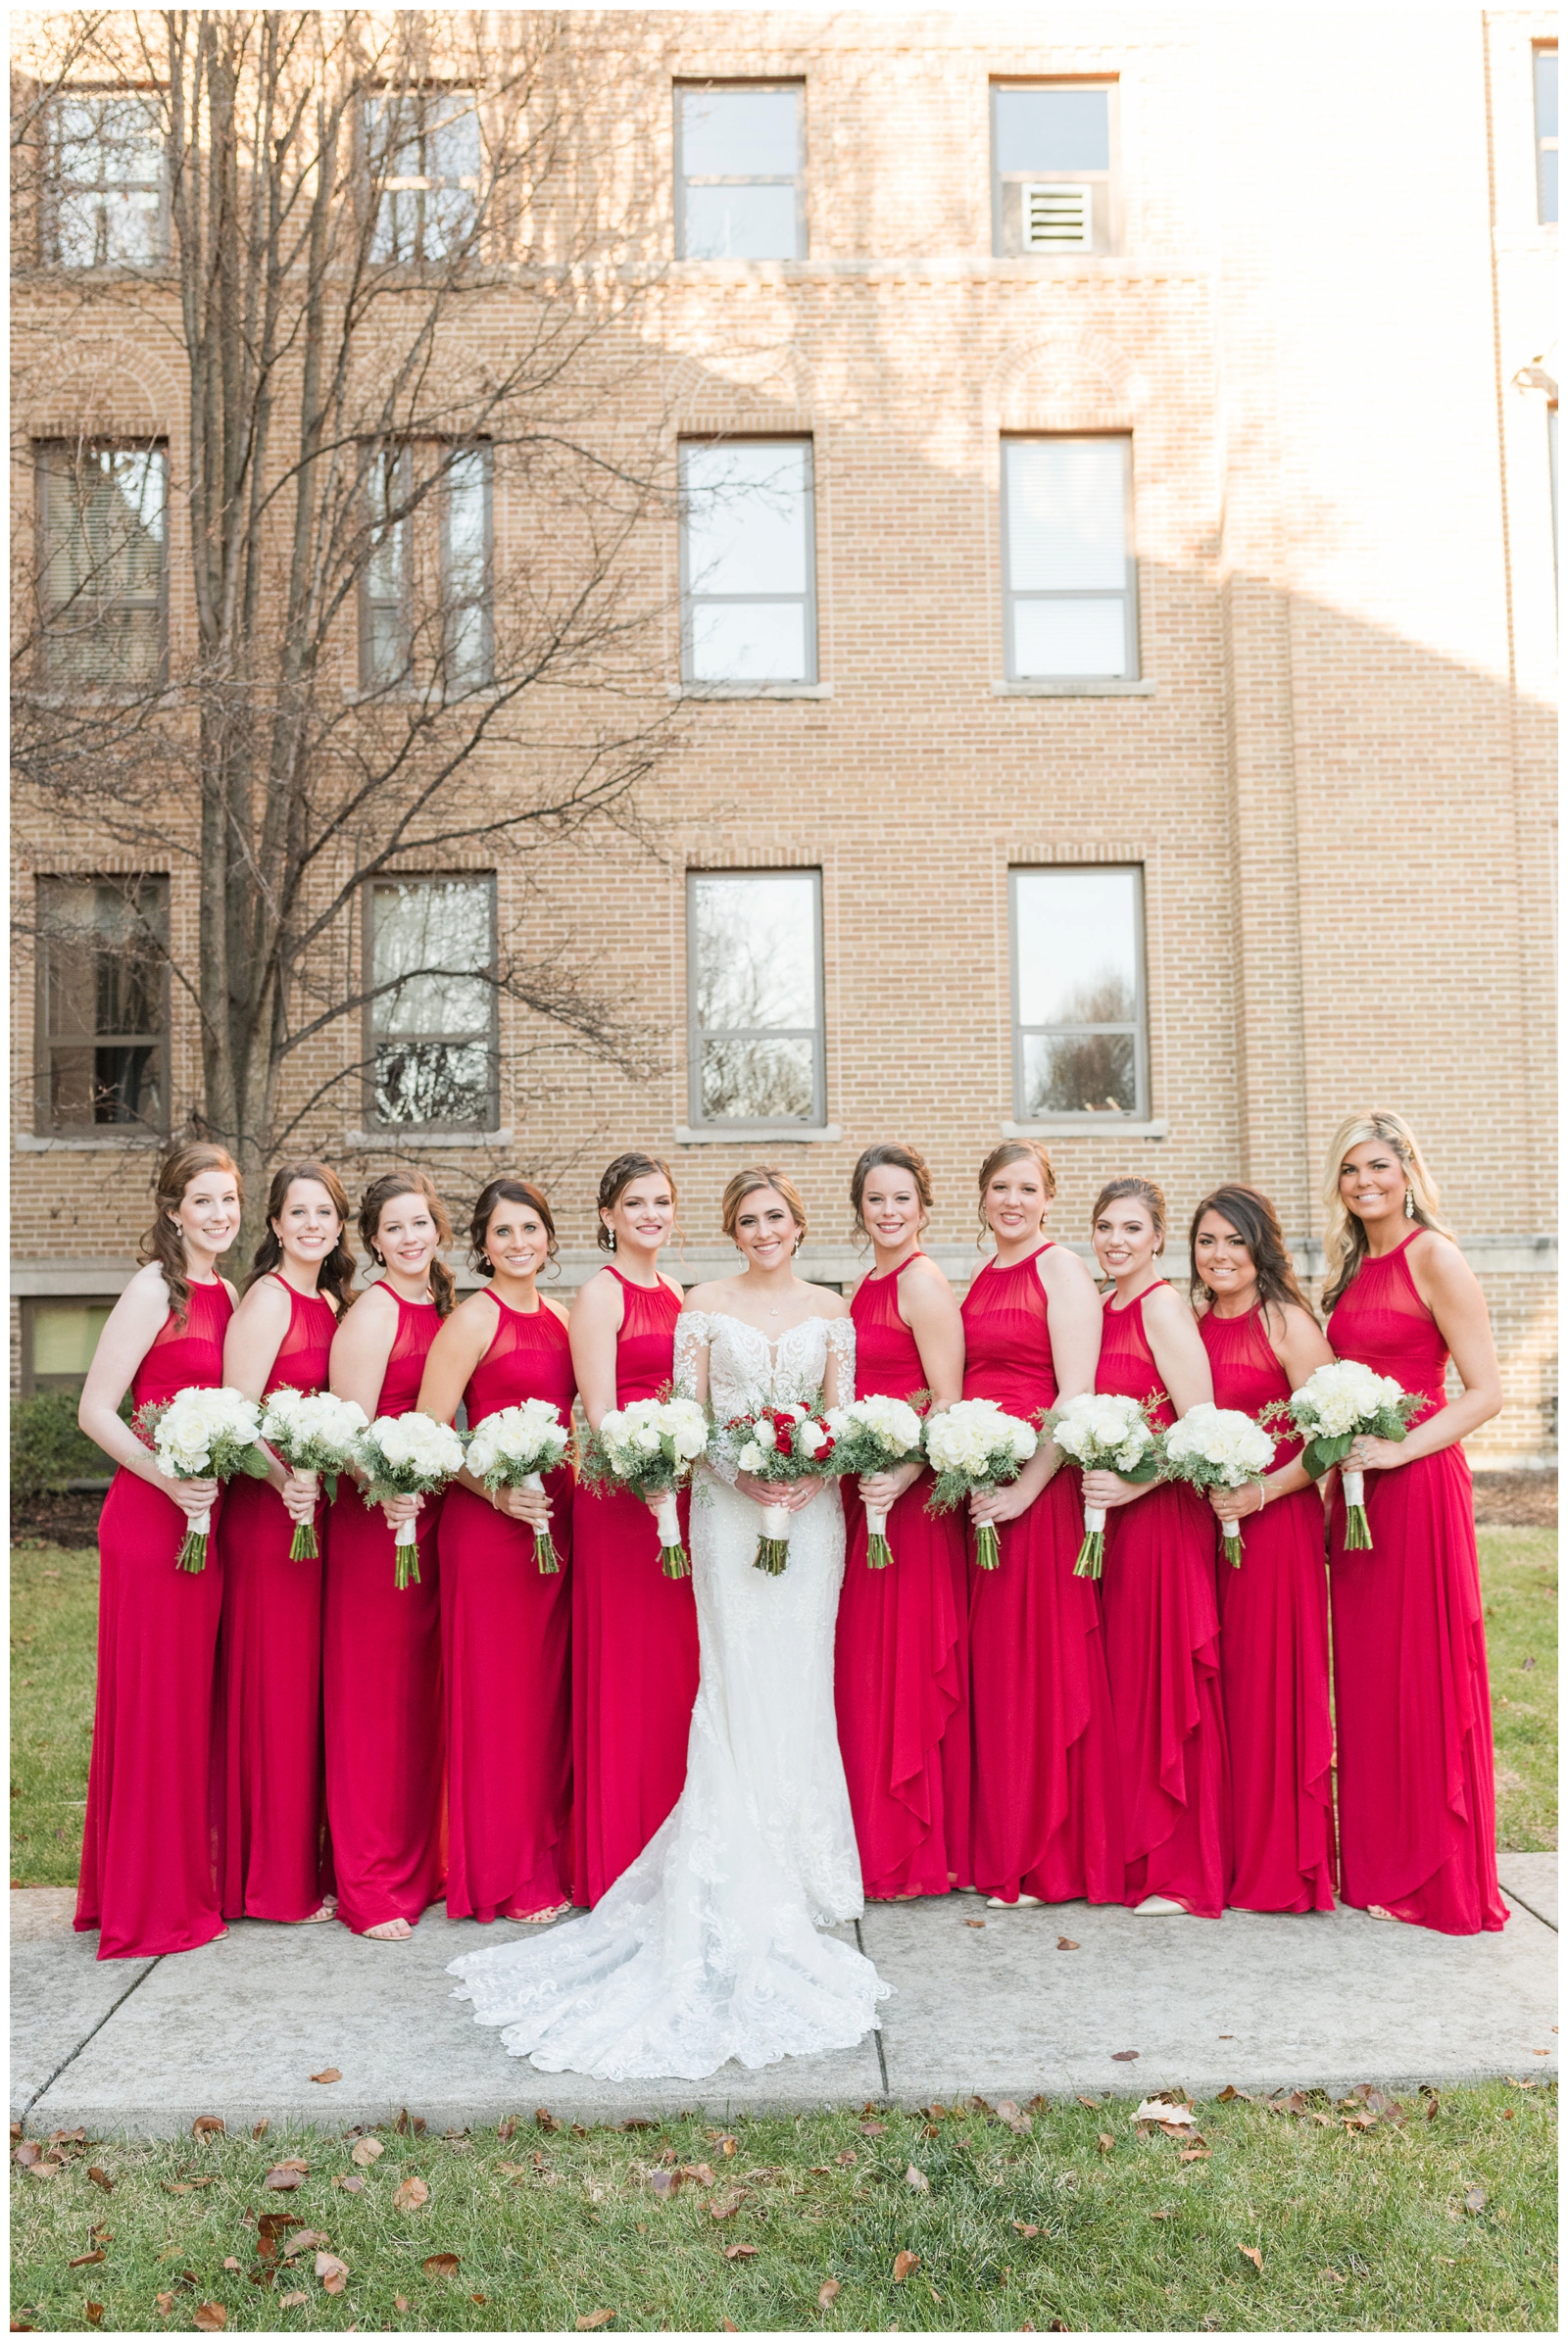 bride poses with bridesmaids in red gowns with white flowers for Christmas wedding